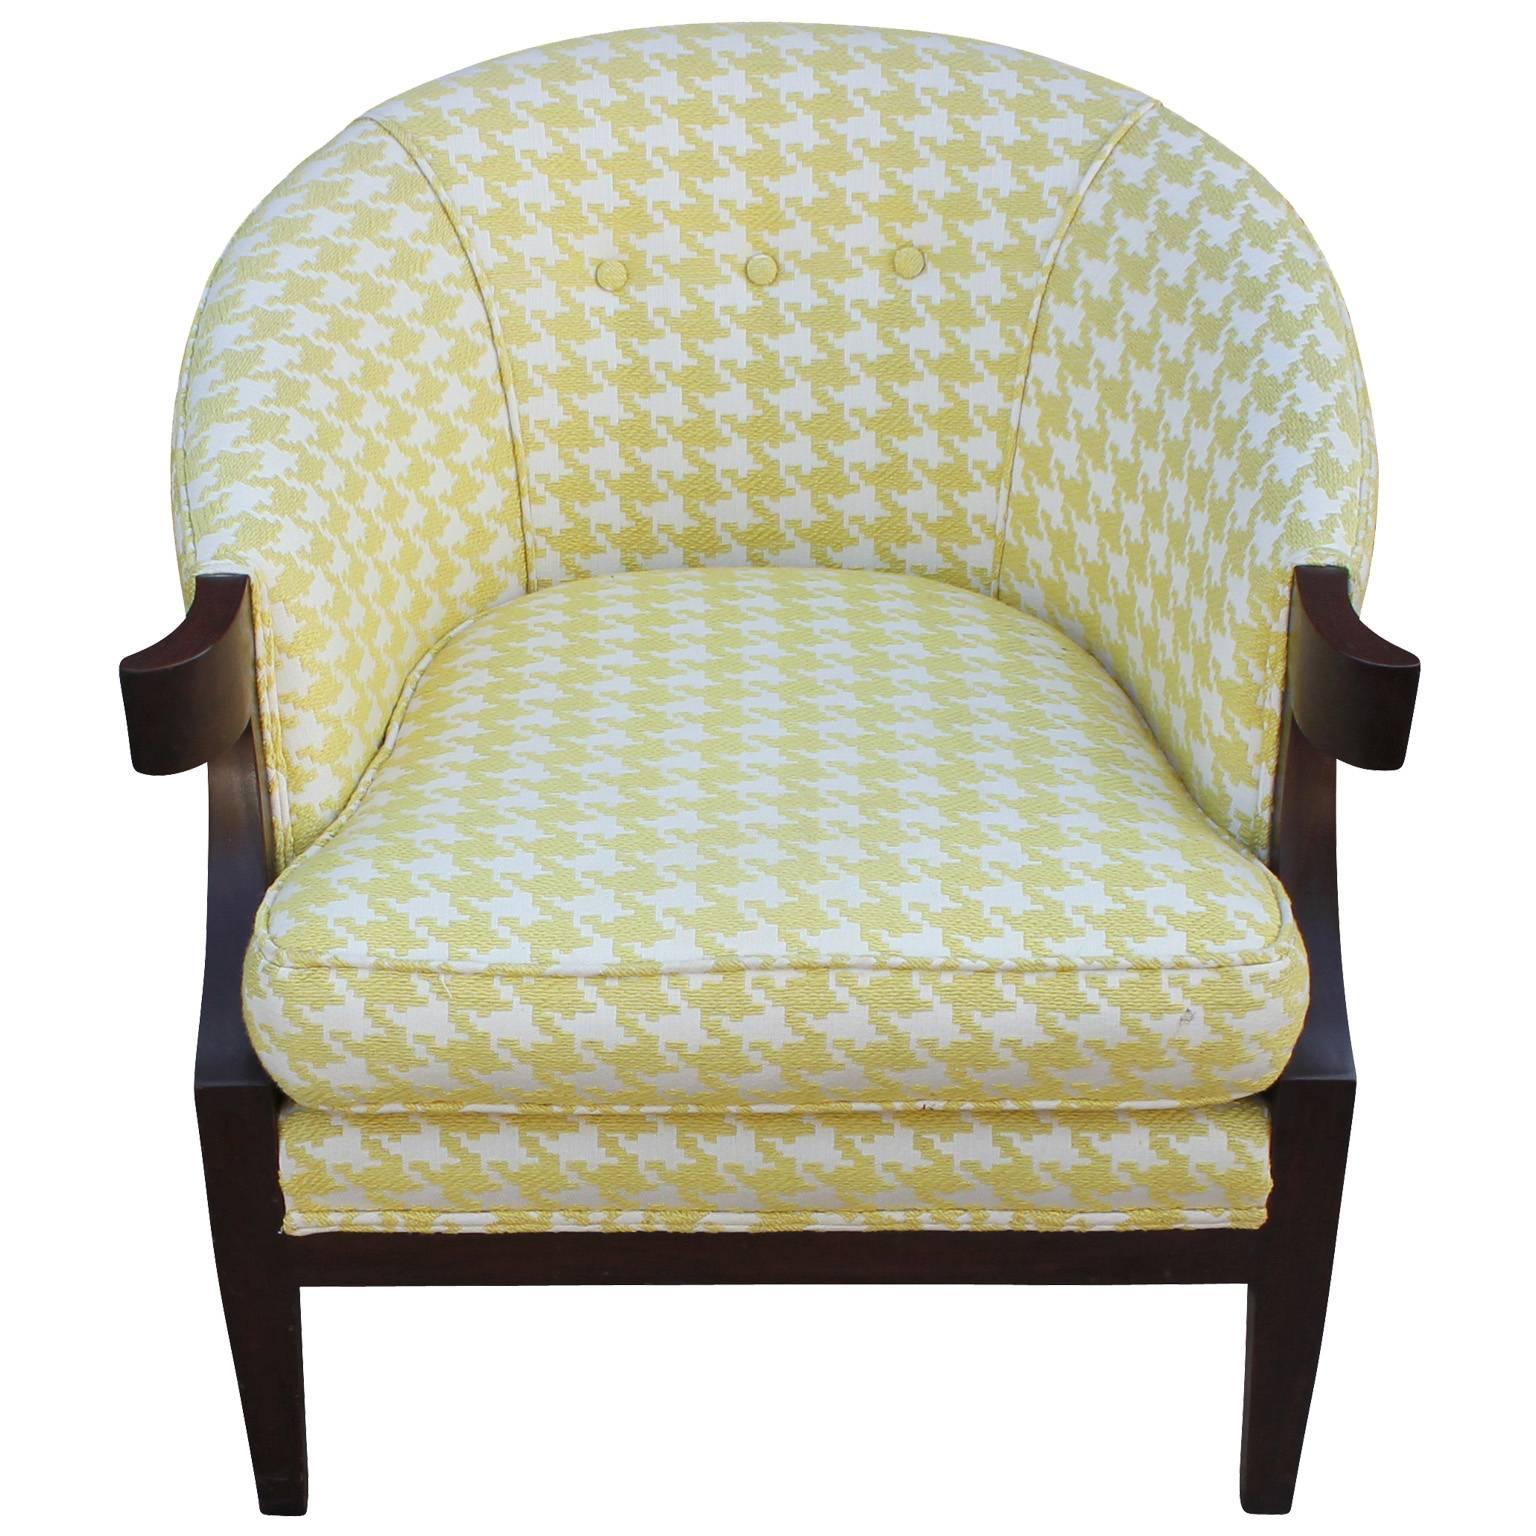 Beautiful pair of original Baker Furniture Lounge chairs in a wonder full yellow and white houndstooth fabric. The chairs are in excellent vintage condition.